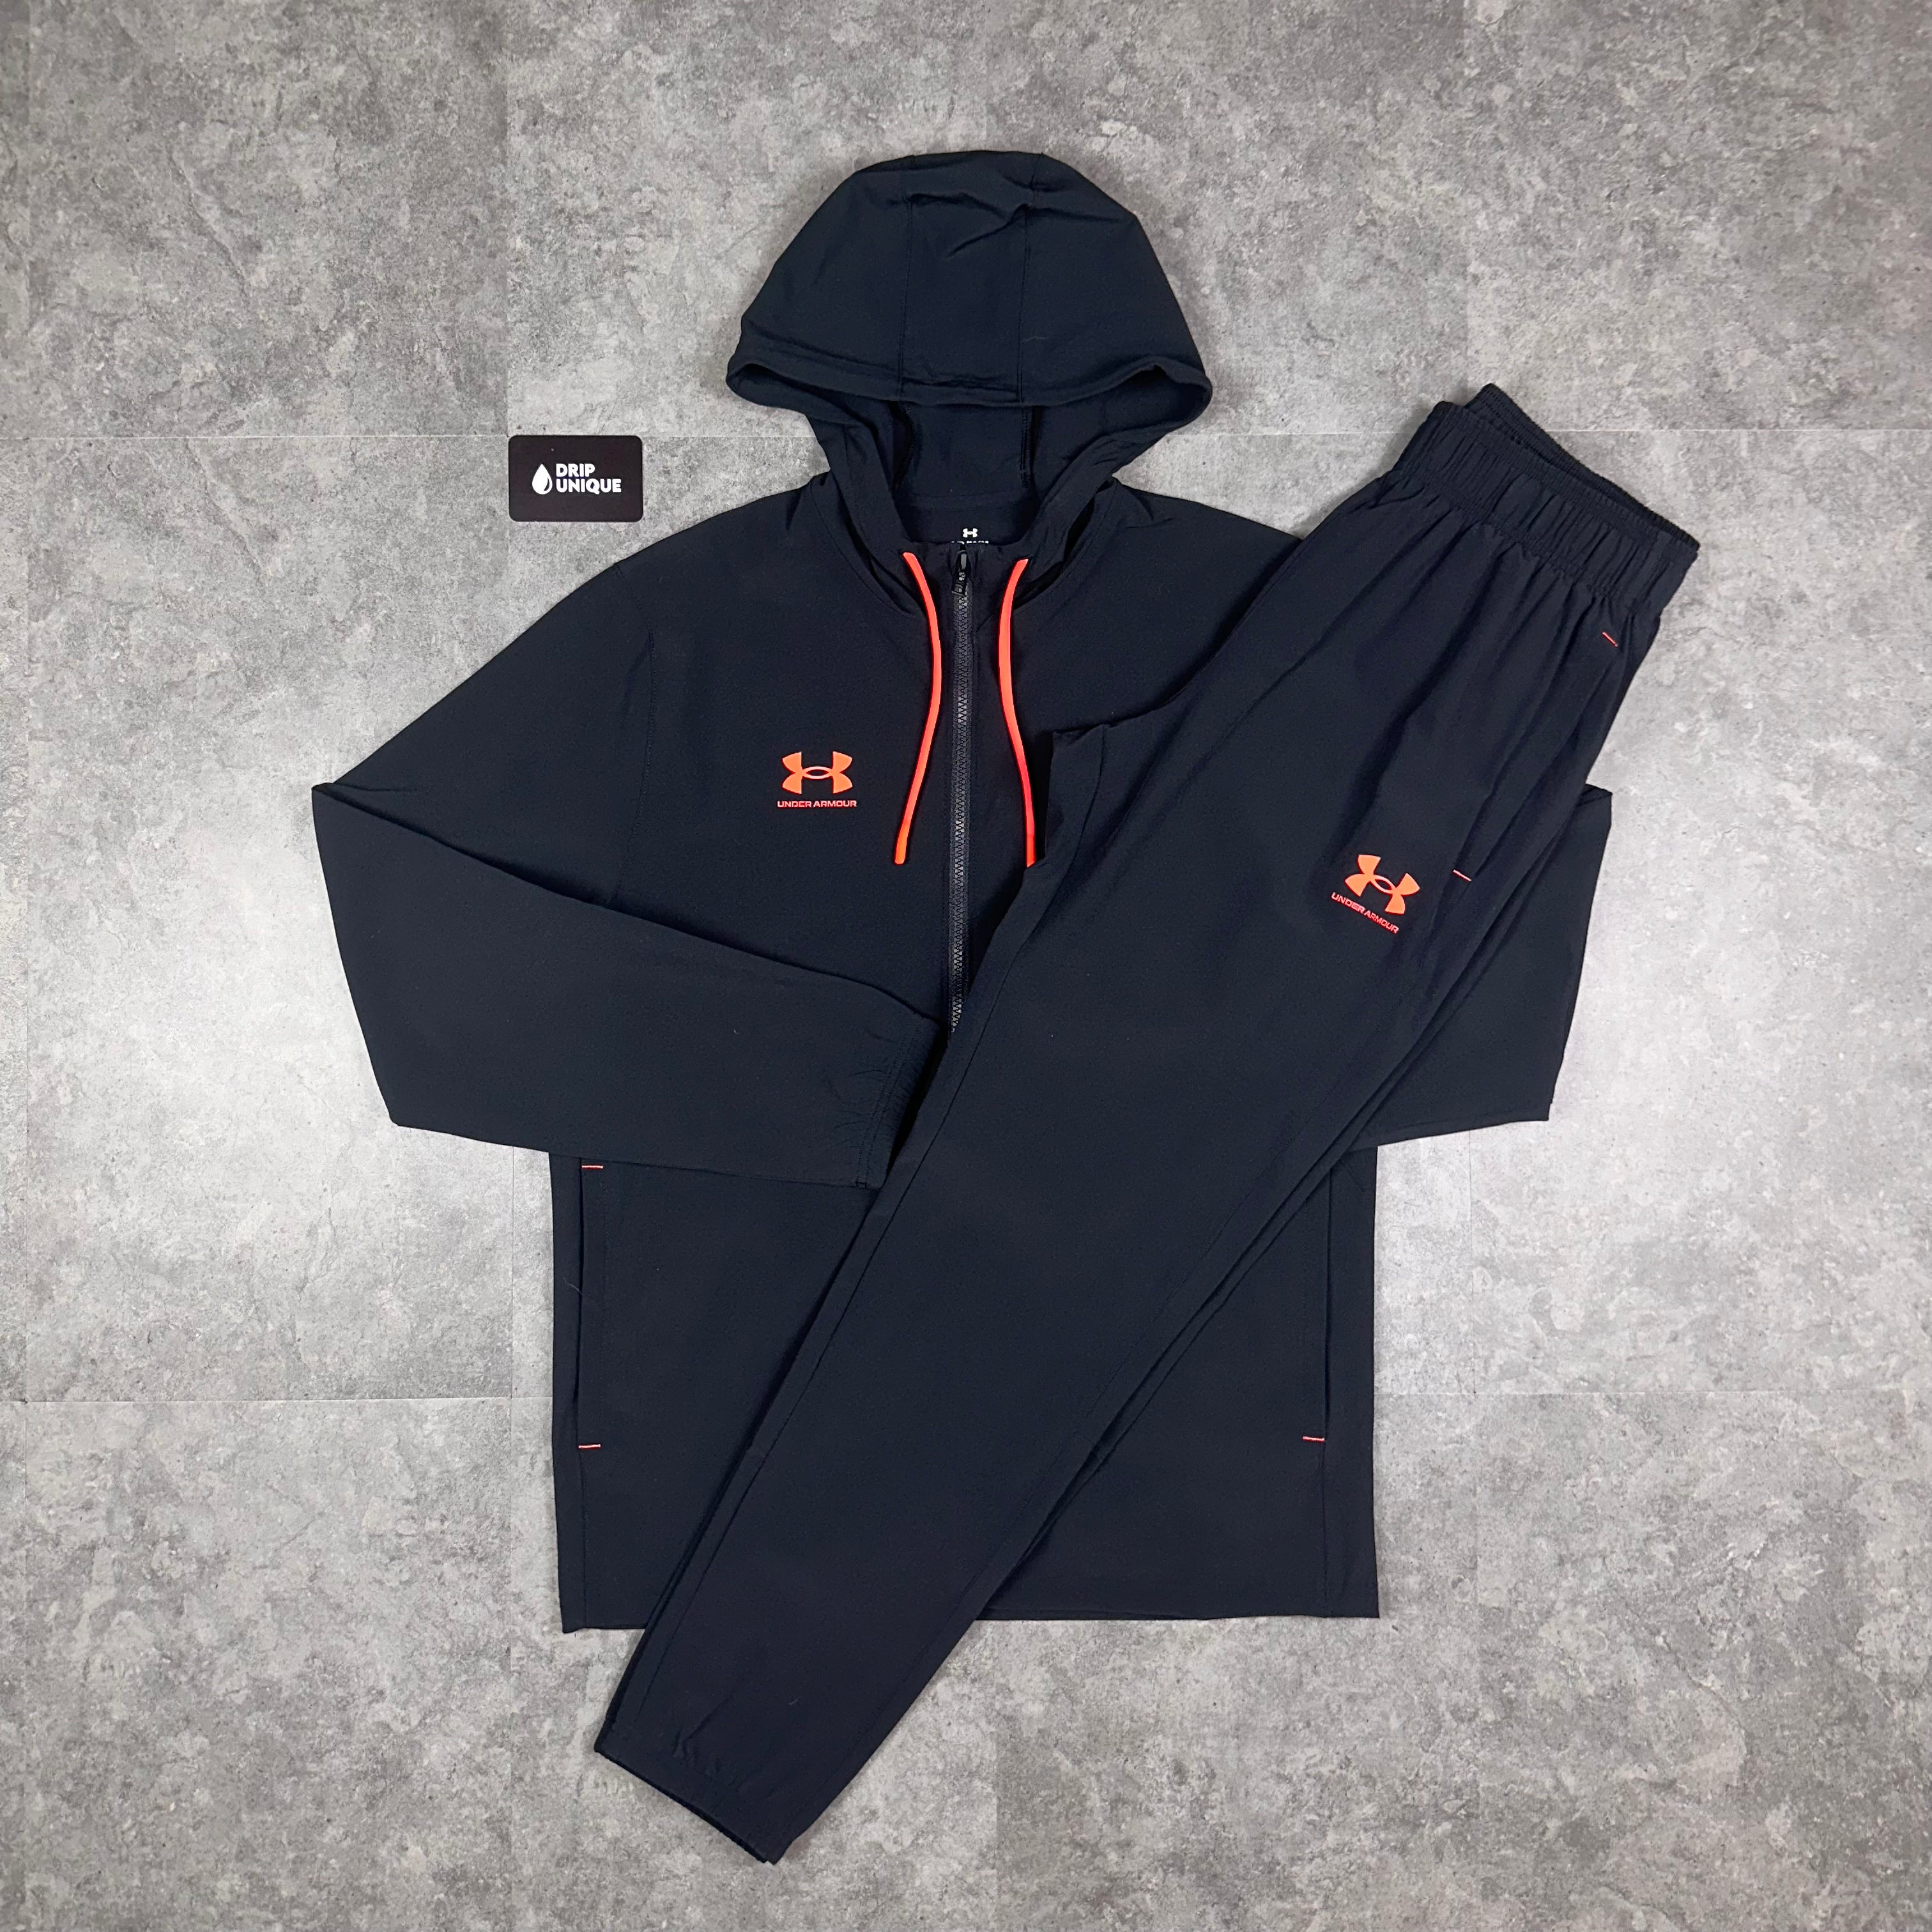 Under Armour - Reflective Tracksuit - Black – DRIP SUPPLY UK